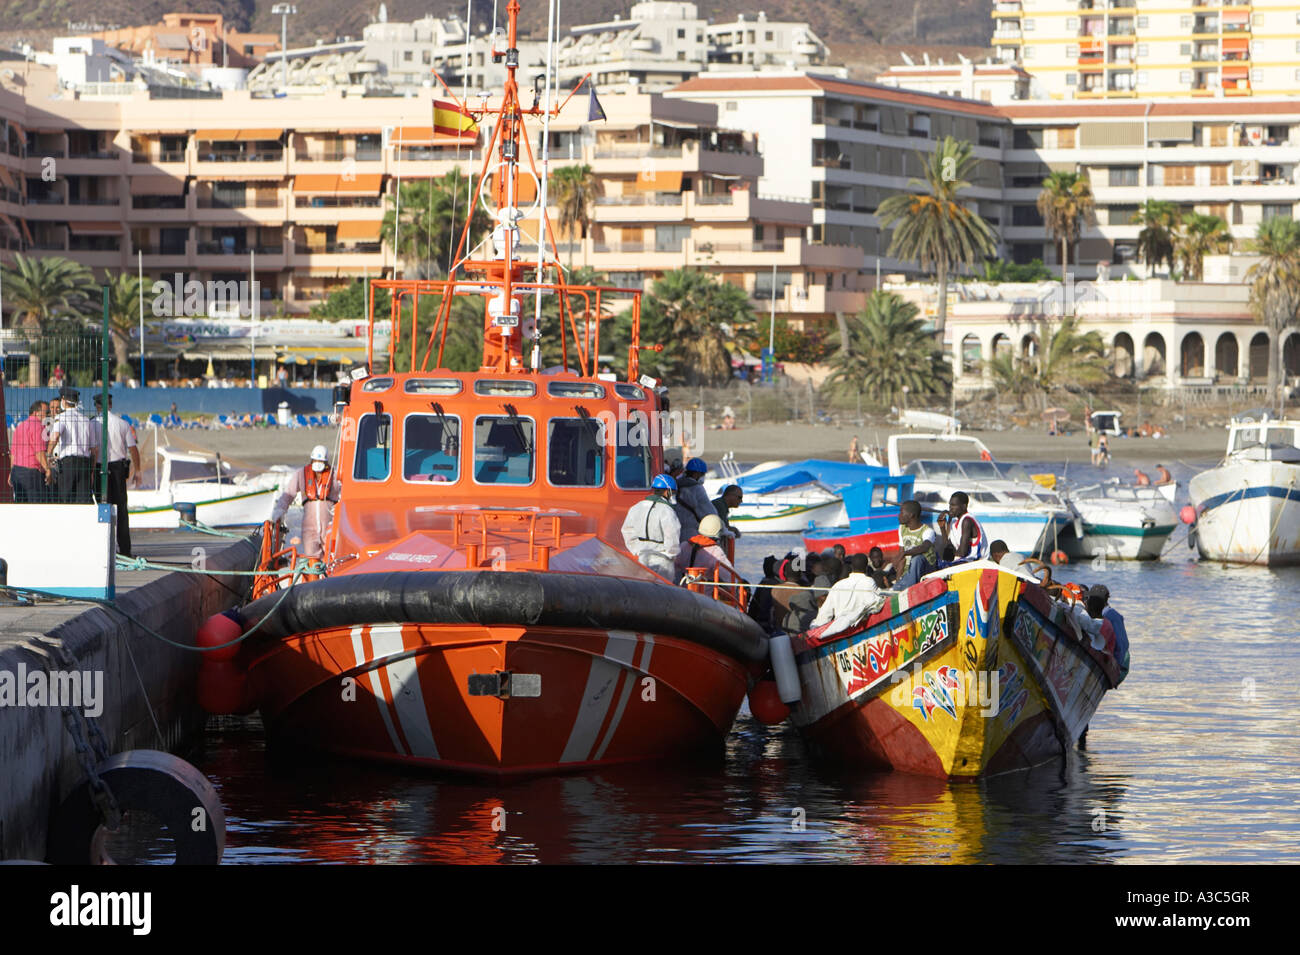 spanish police and officials in protective clothing and masks on orange maritimo salvamento boat remove illegal immigrants Stock Photo